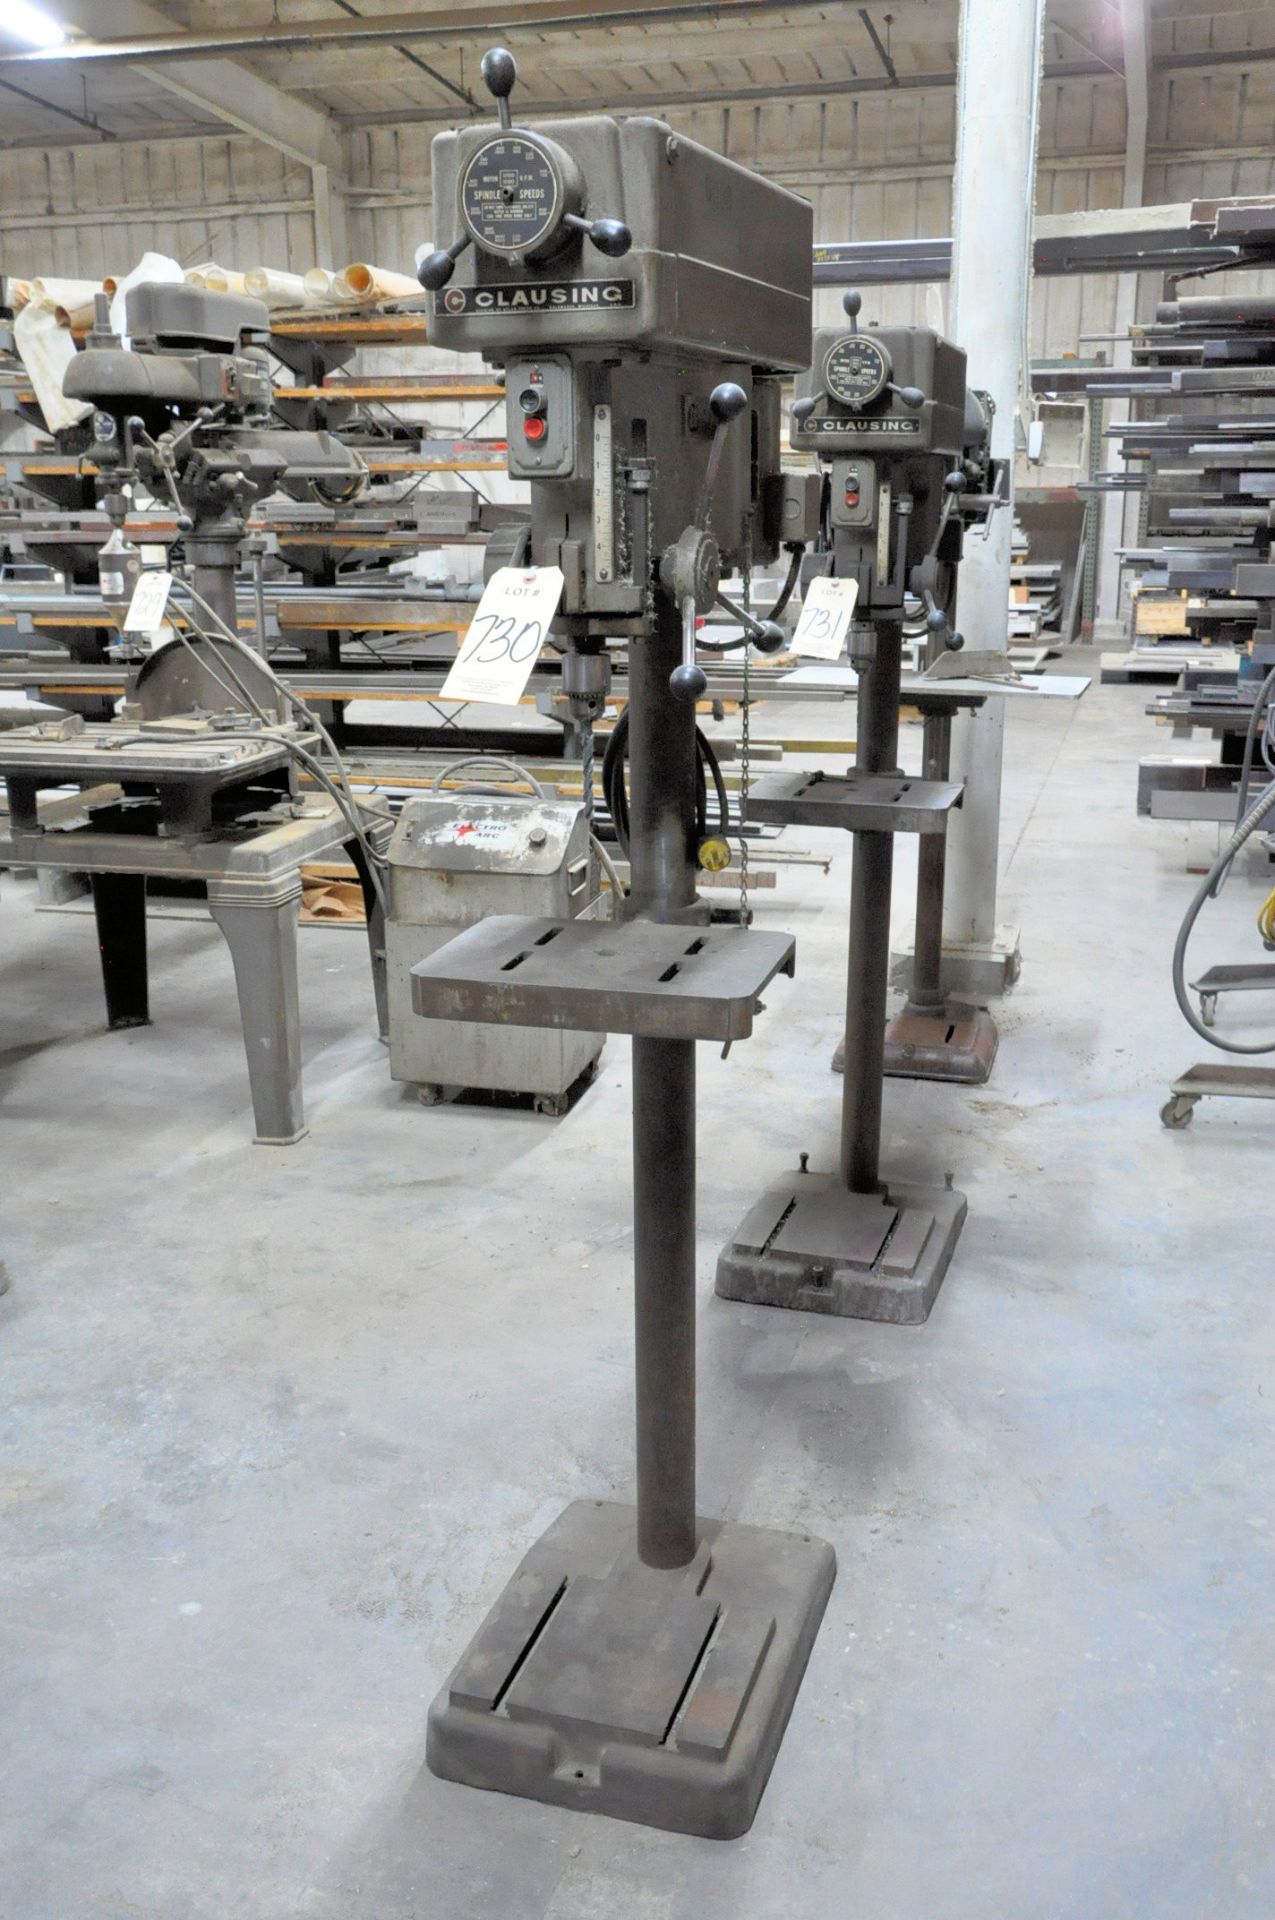 Clausing Model 1670, 15" Floor Standing Drill Press, S/n 517506, 14" x 10" Work Surface